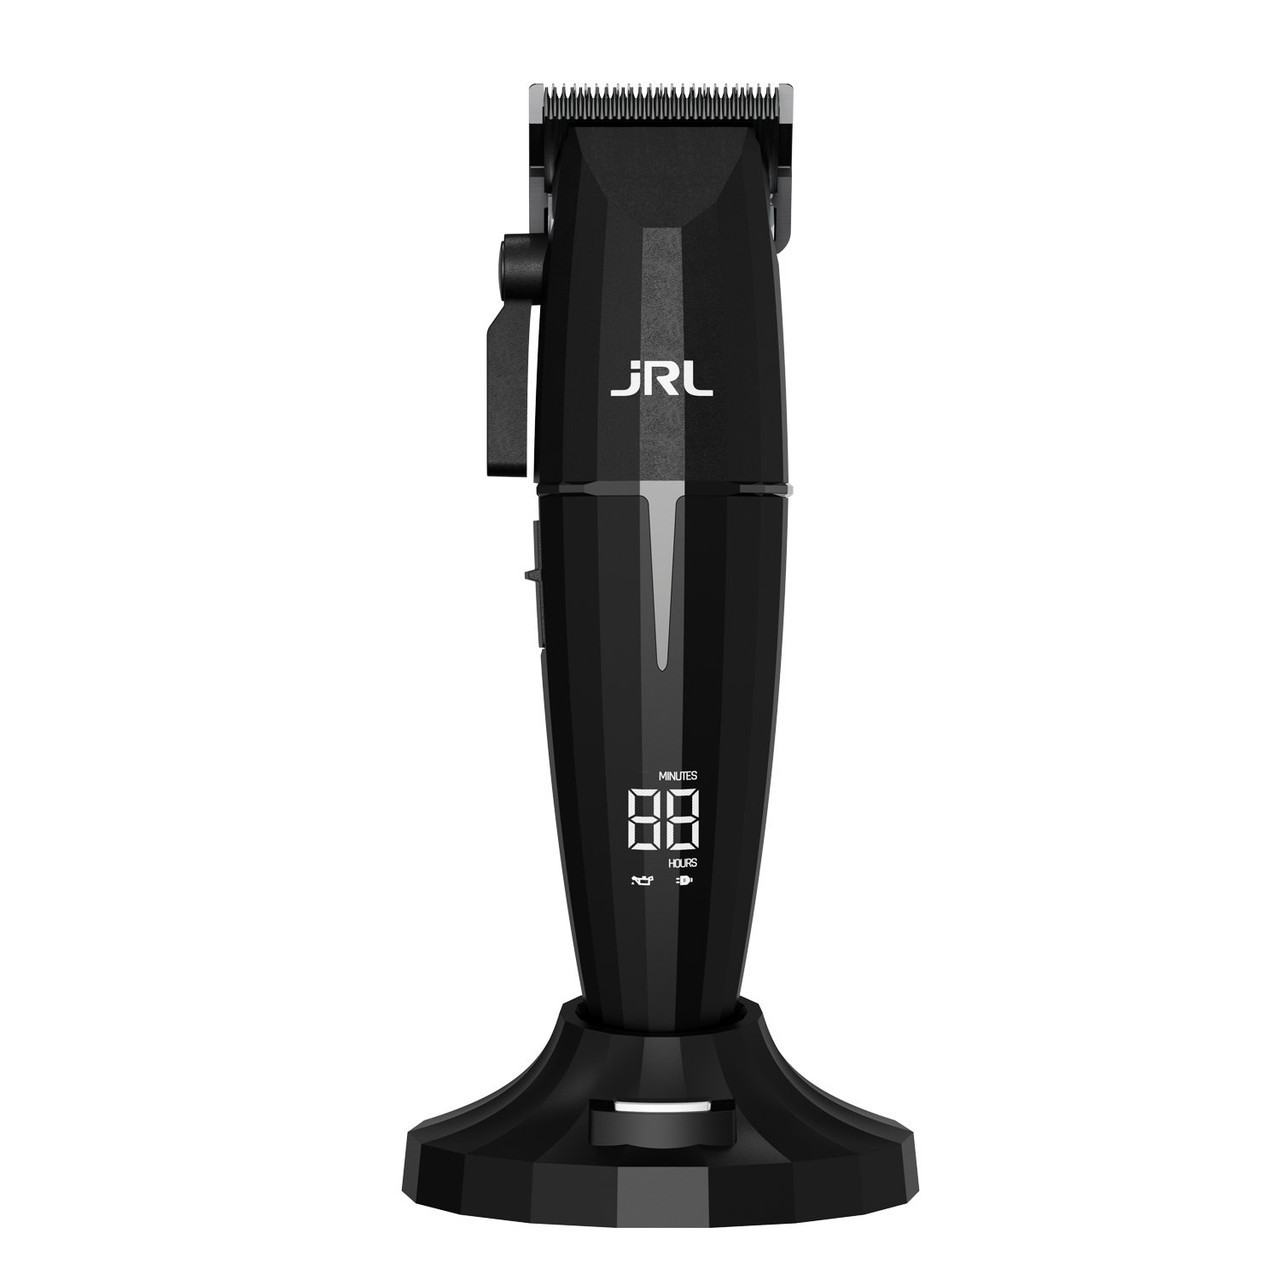 Discover precision grooming with the JRL ONYX Clipper - Black, a